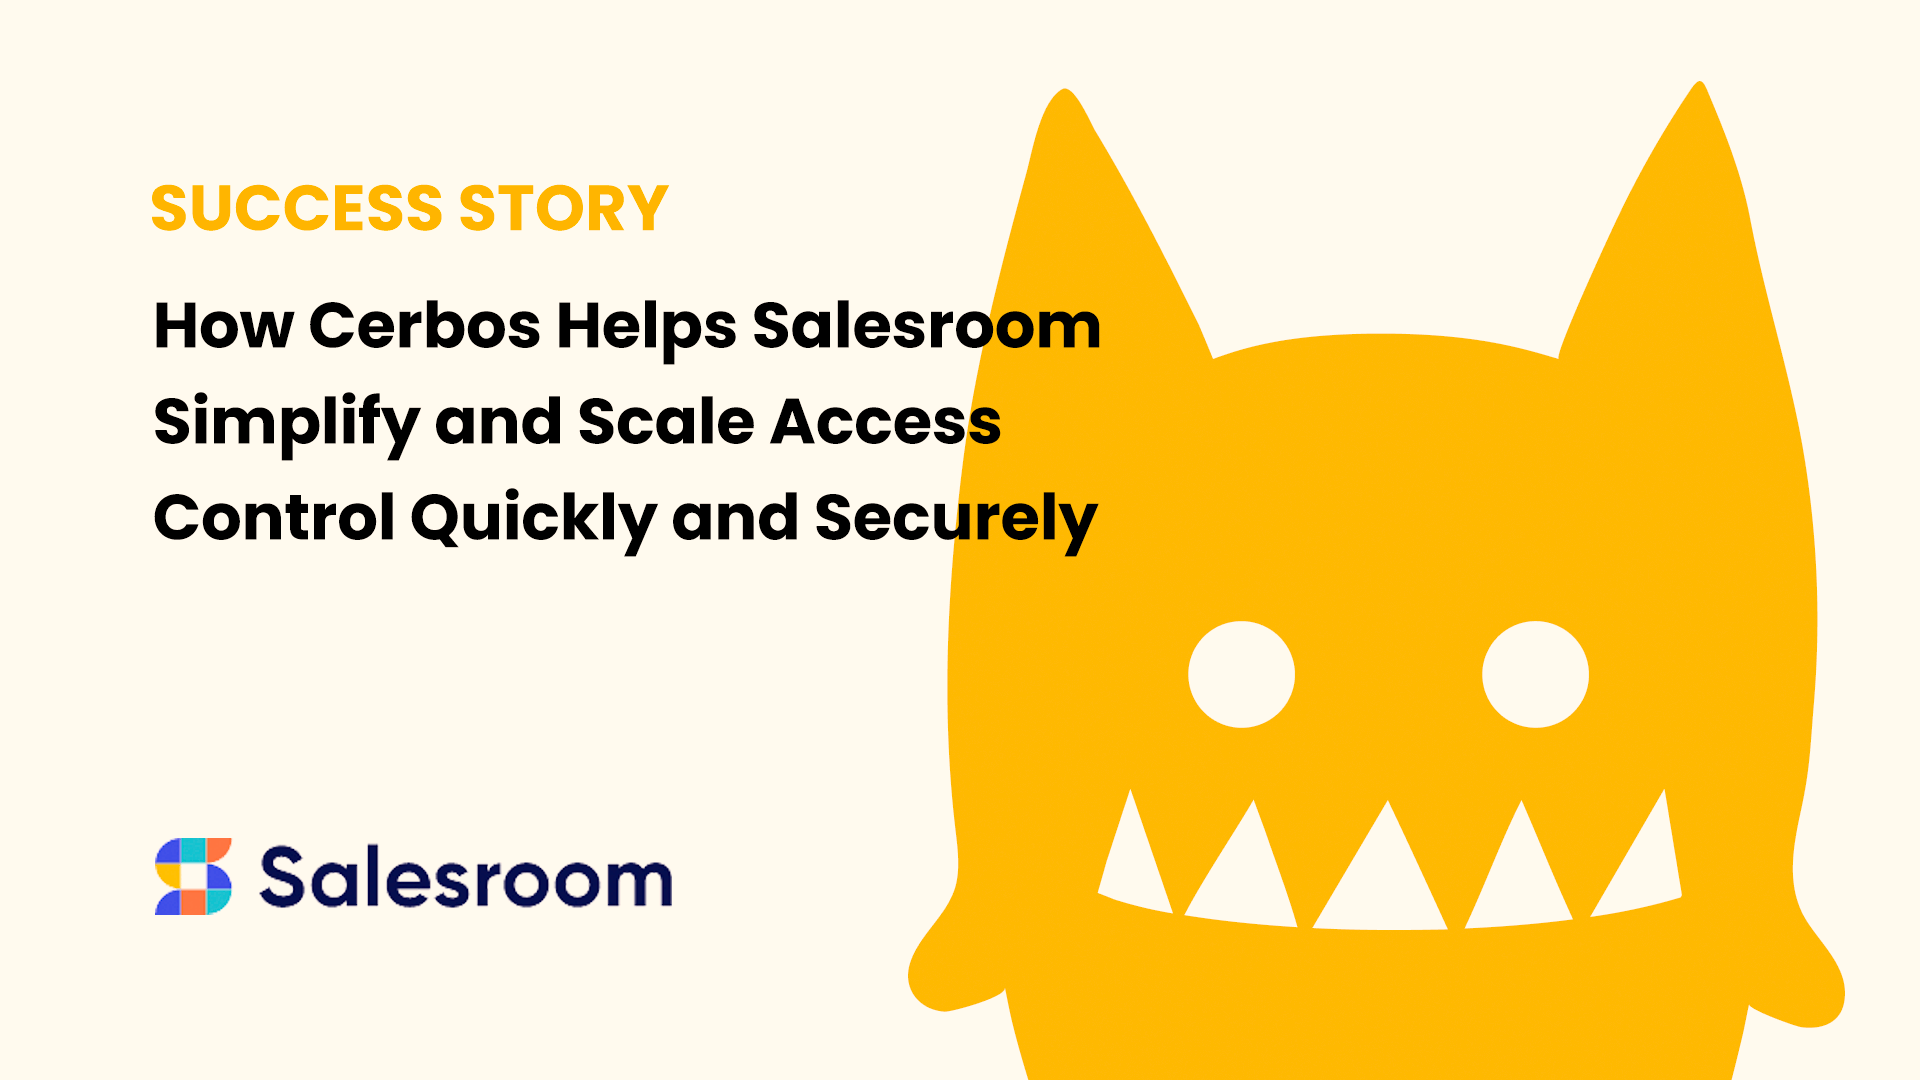 How Cerbos Helps Salesroom Simplify and Scale Access Control Quickly and Securely